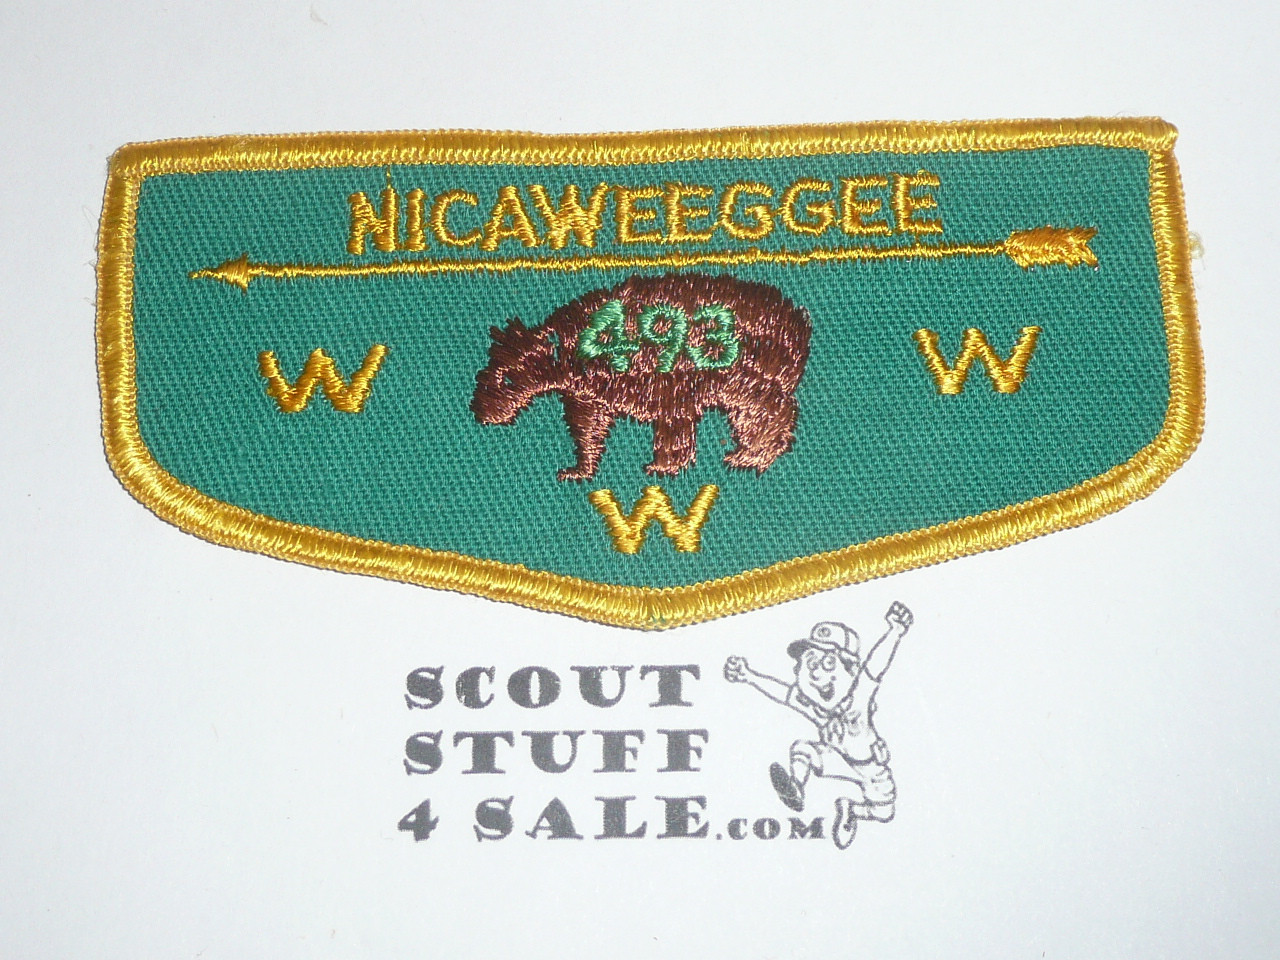 Order of the Arrow Lodge #493 Nicaweeggee zf3 Flap Patch